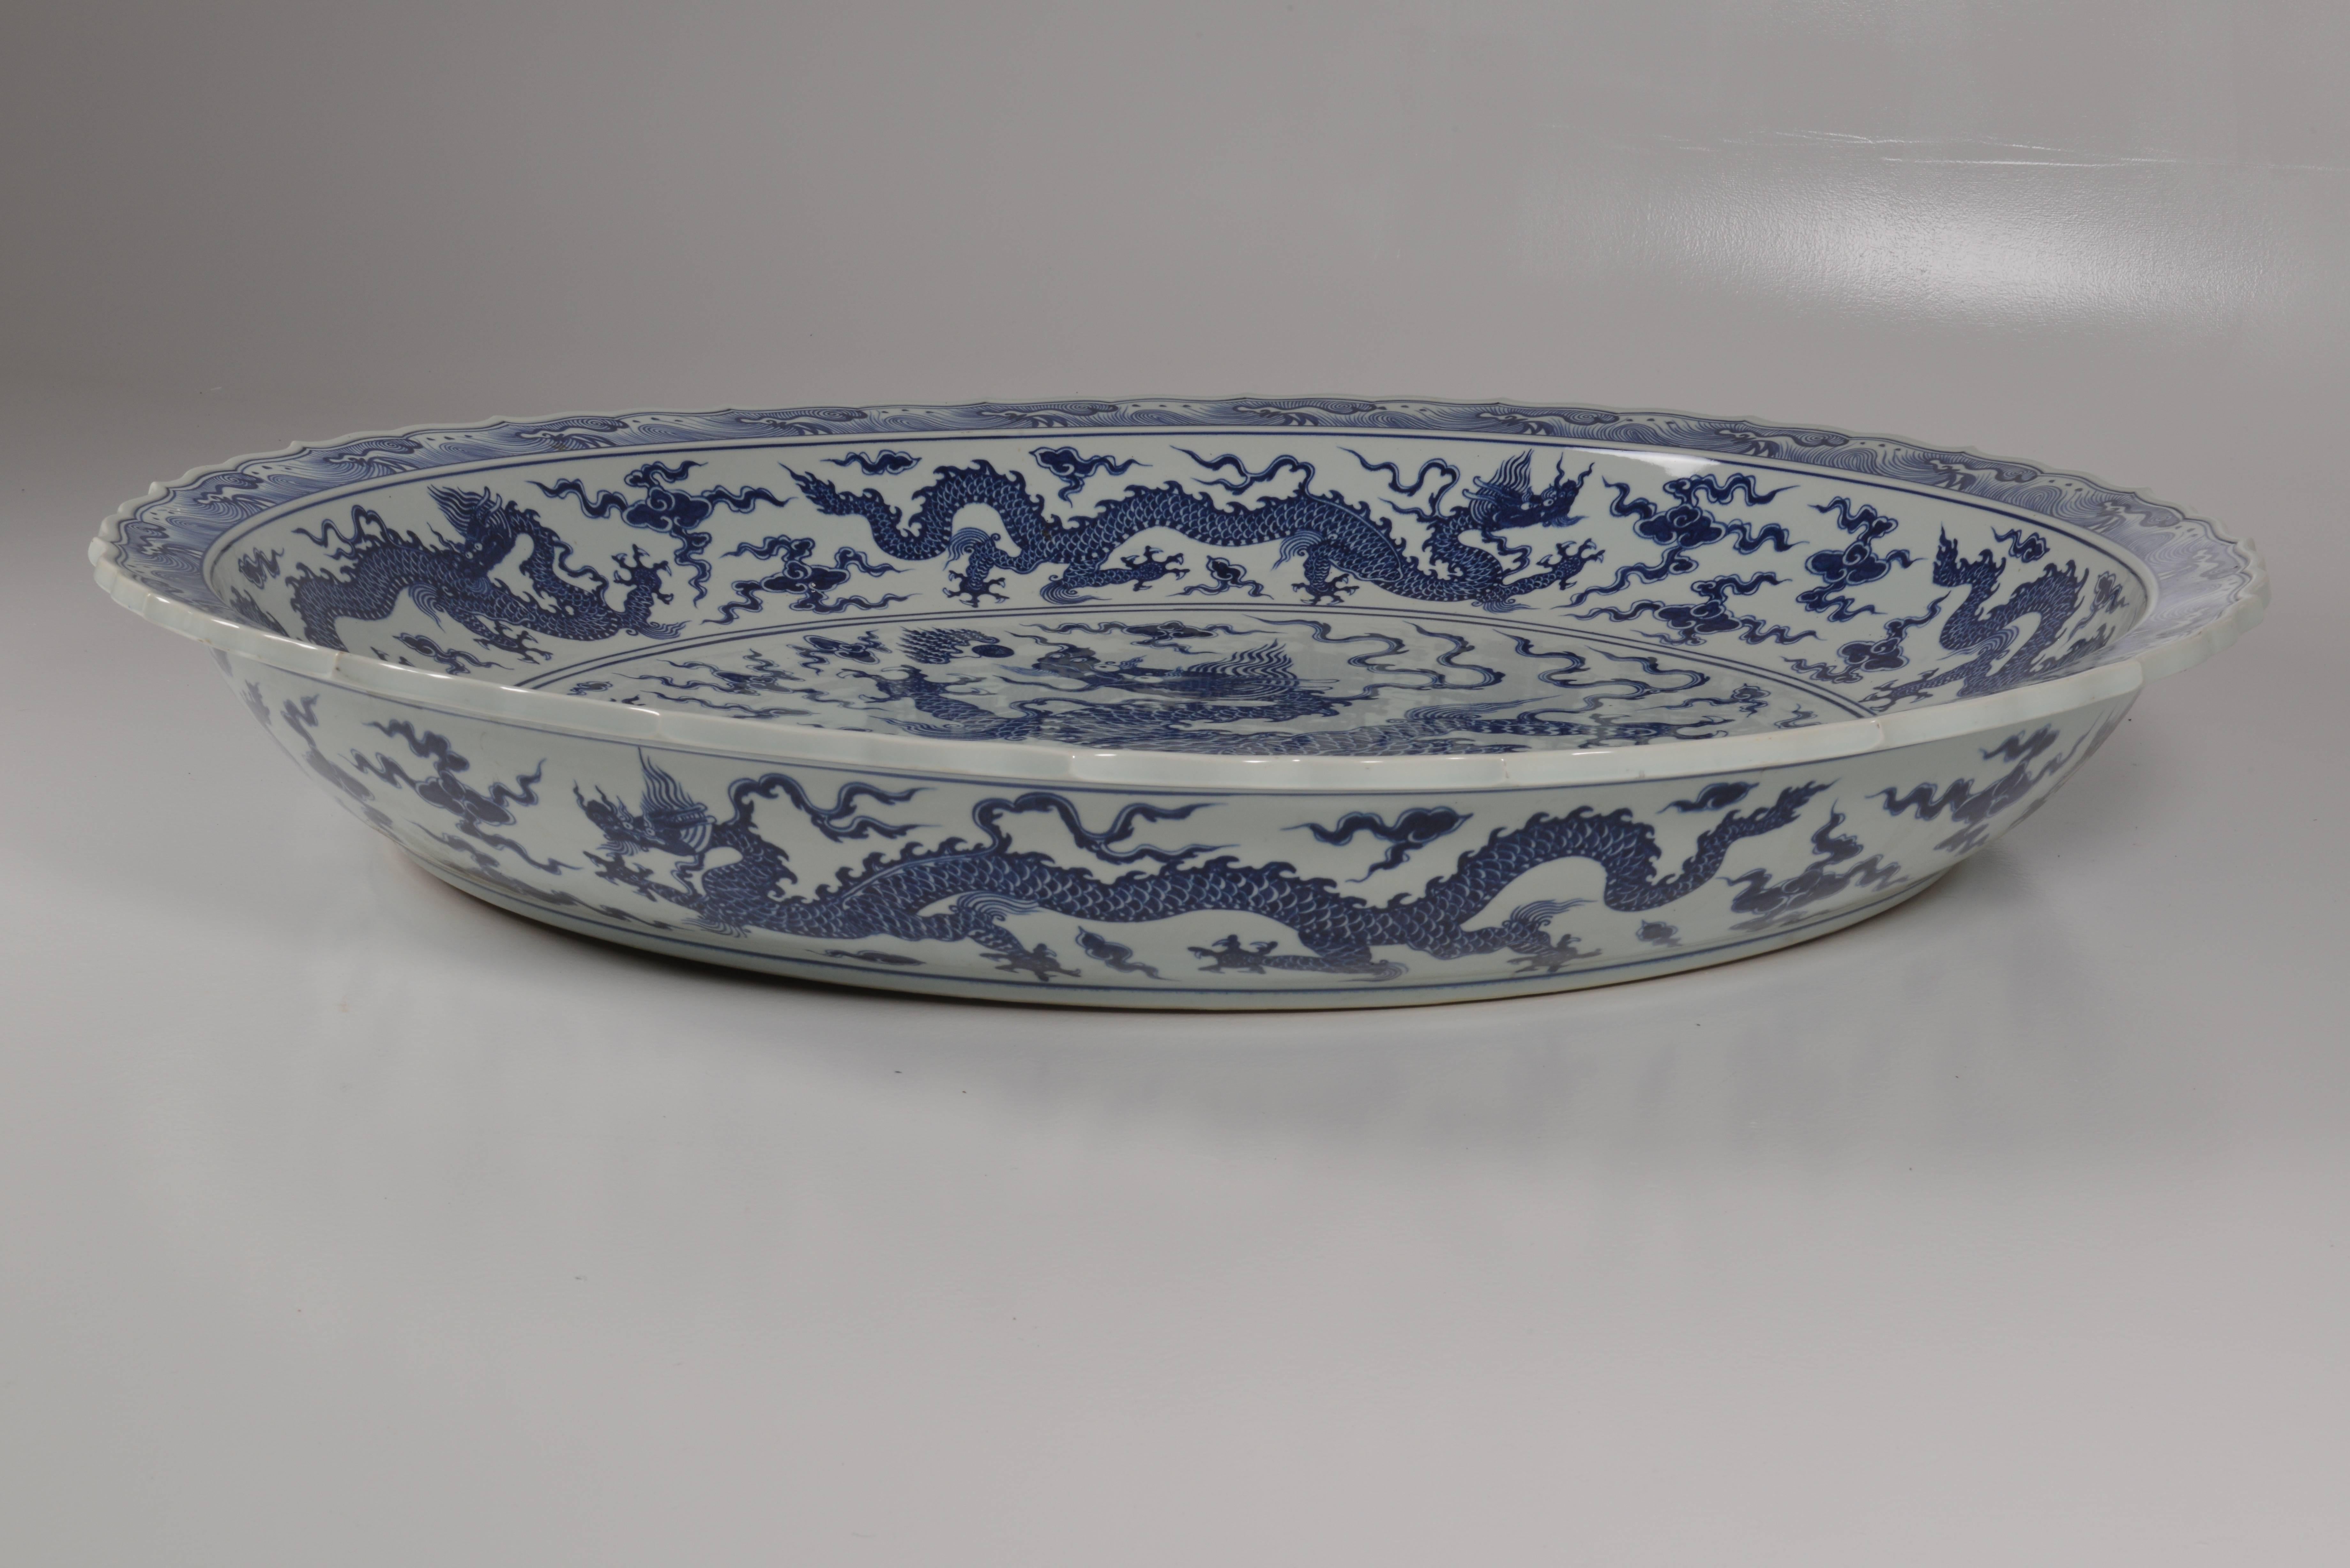 Baroque Gigantic Chinese Porcelain Plate